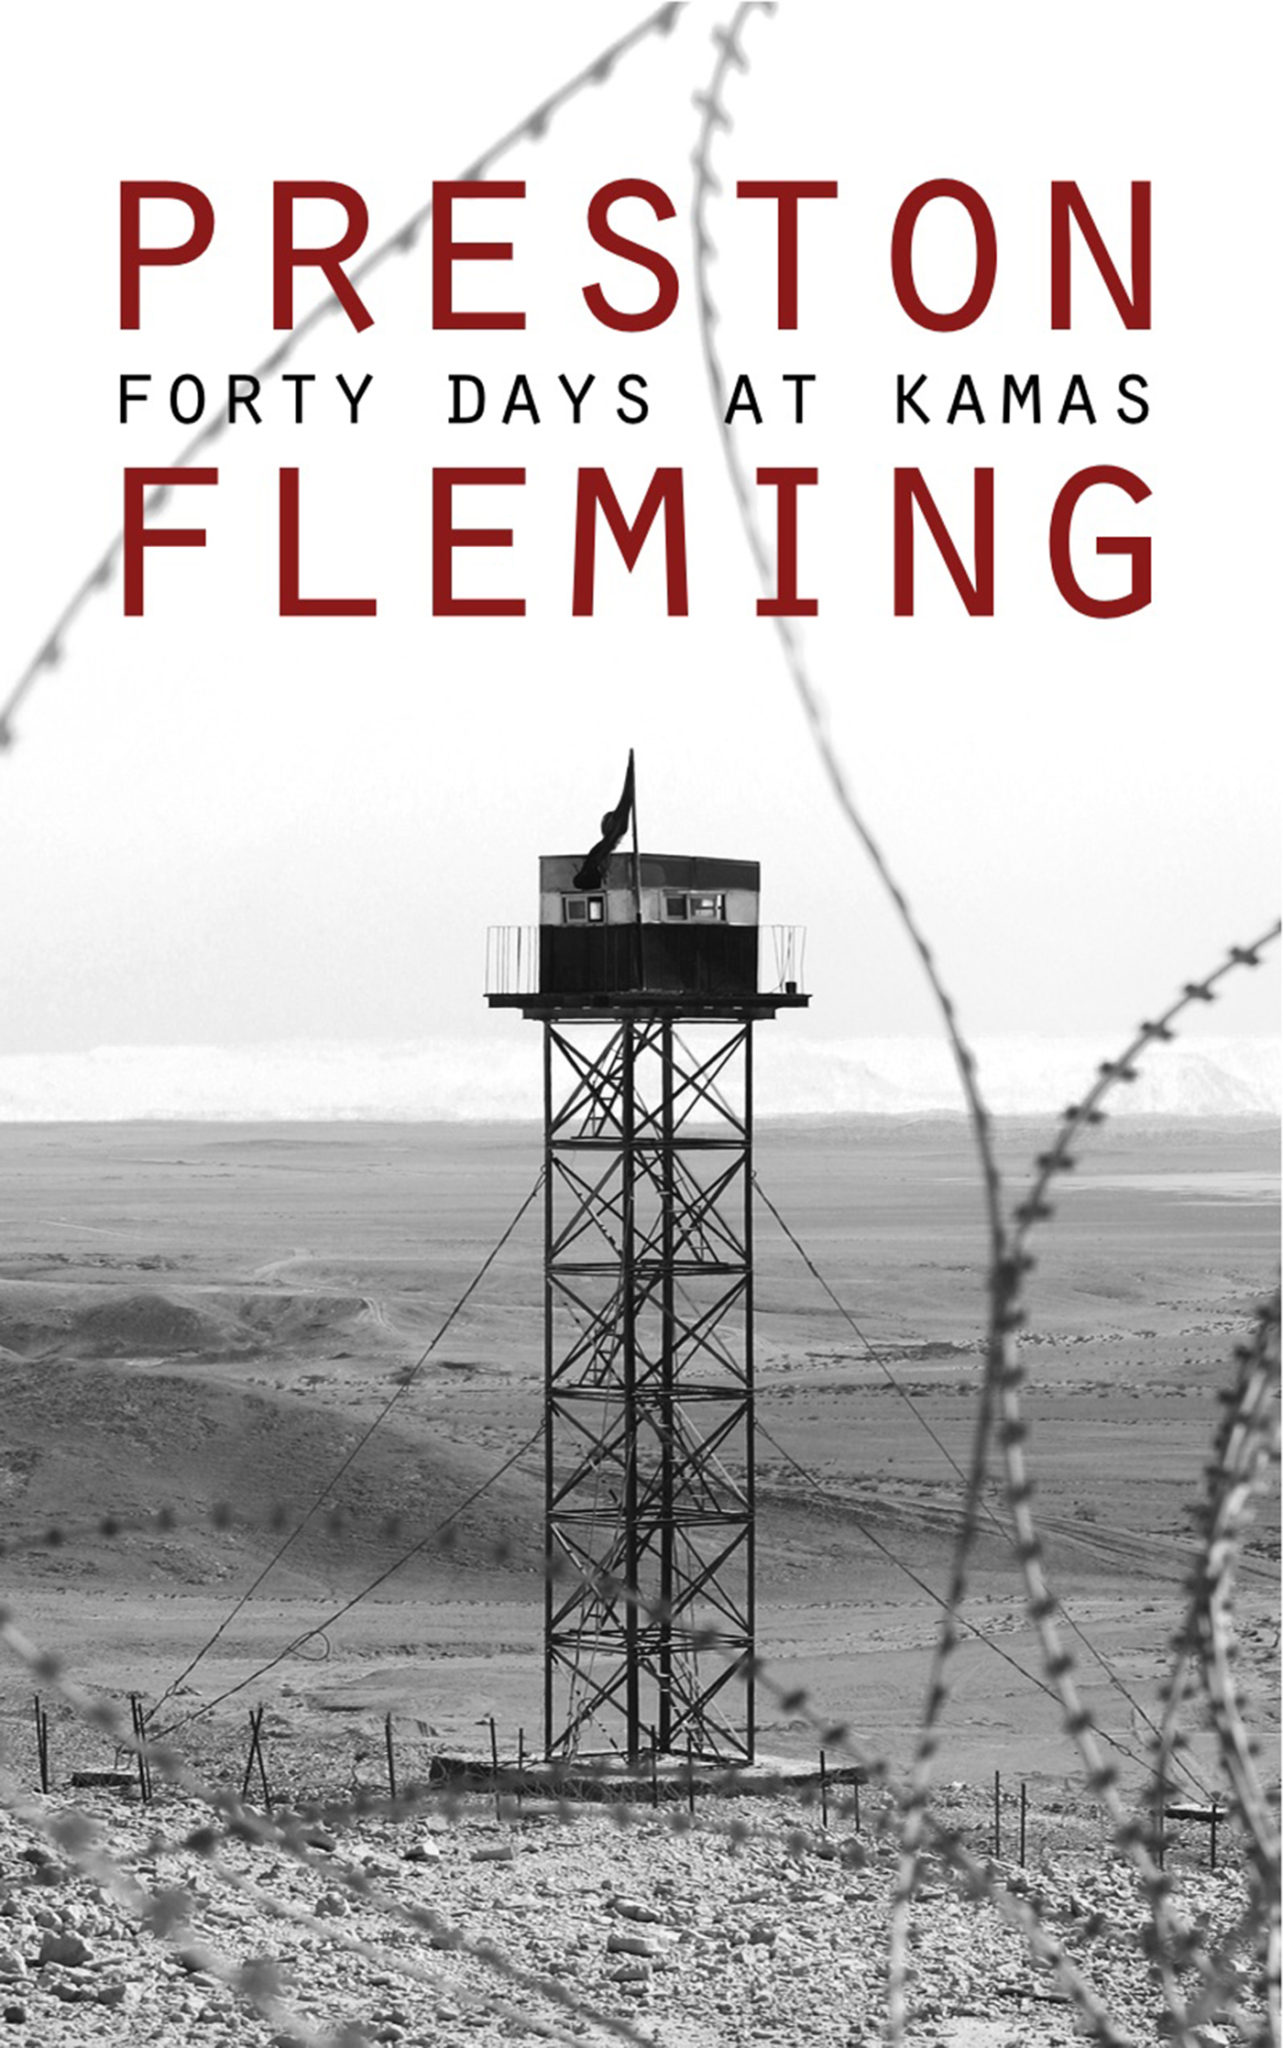 FREE: Forty Days at Kamas by Preston Fleming